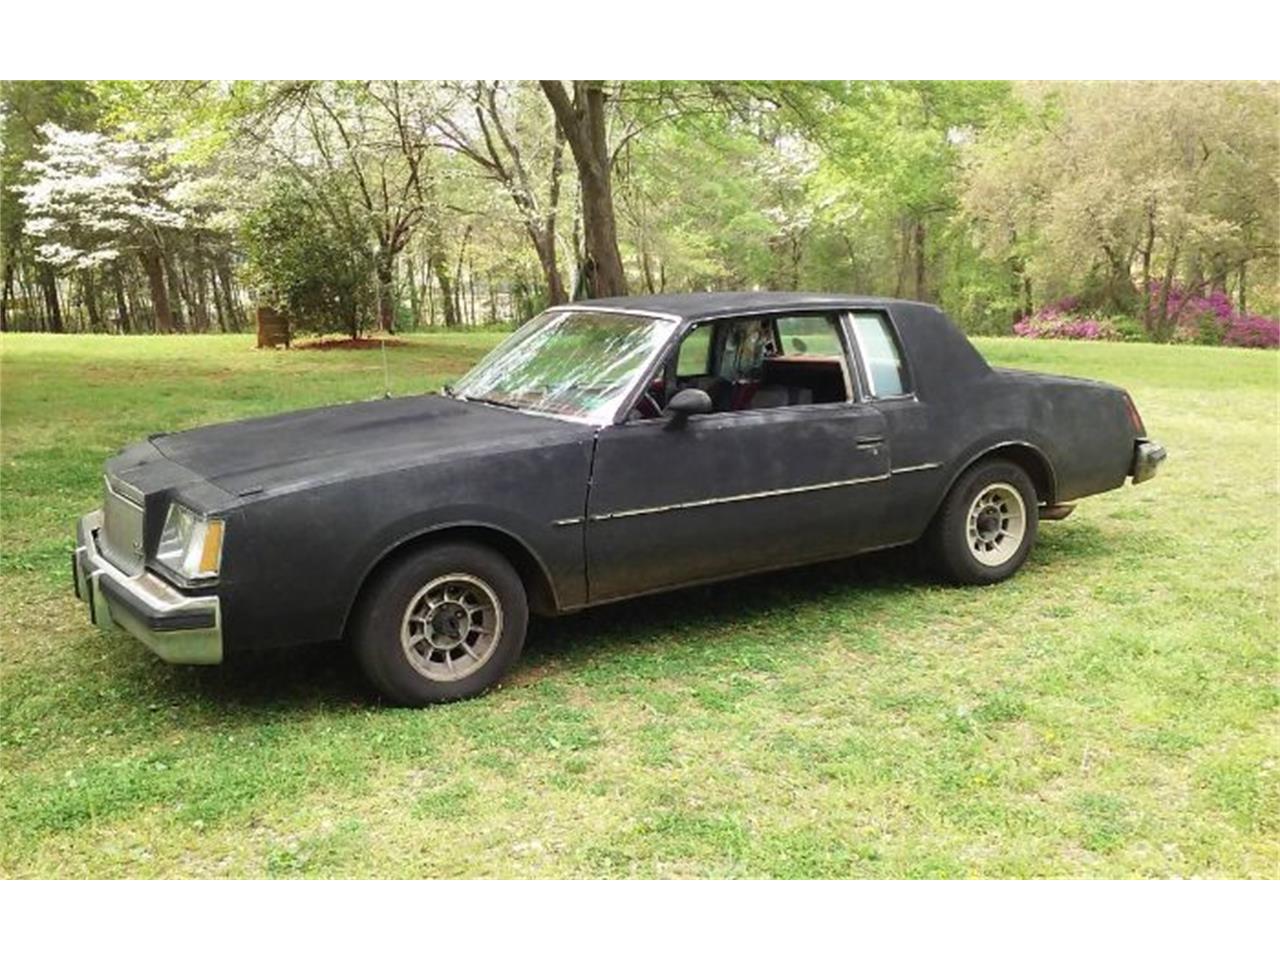 For Sale: 1979 Buick Regal in Cadillac, Michigan for sale in Cadillac, MI